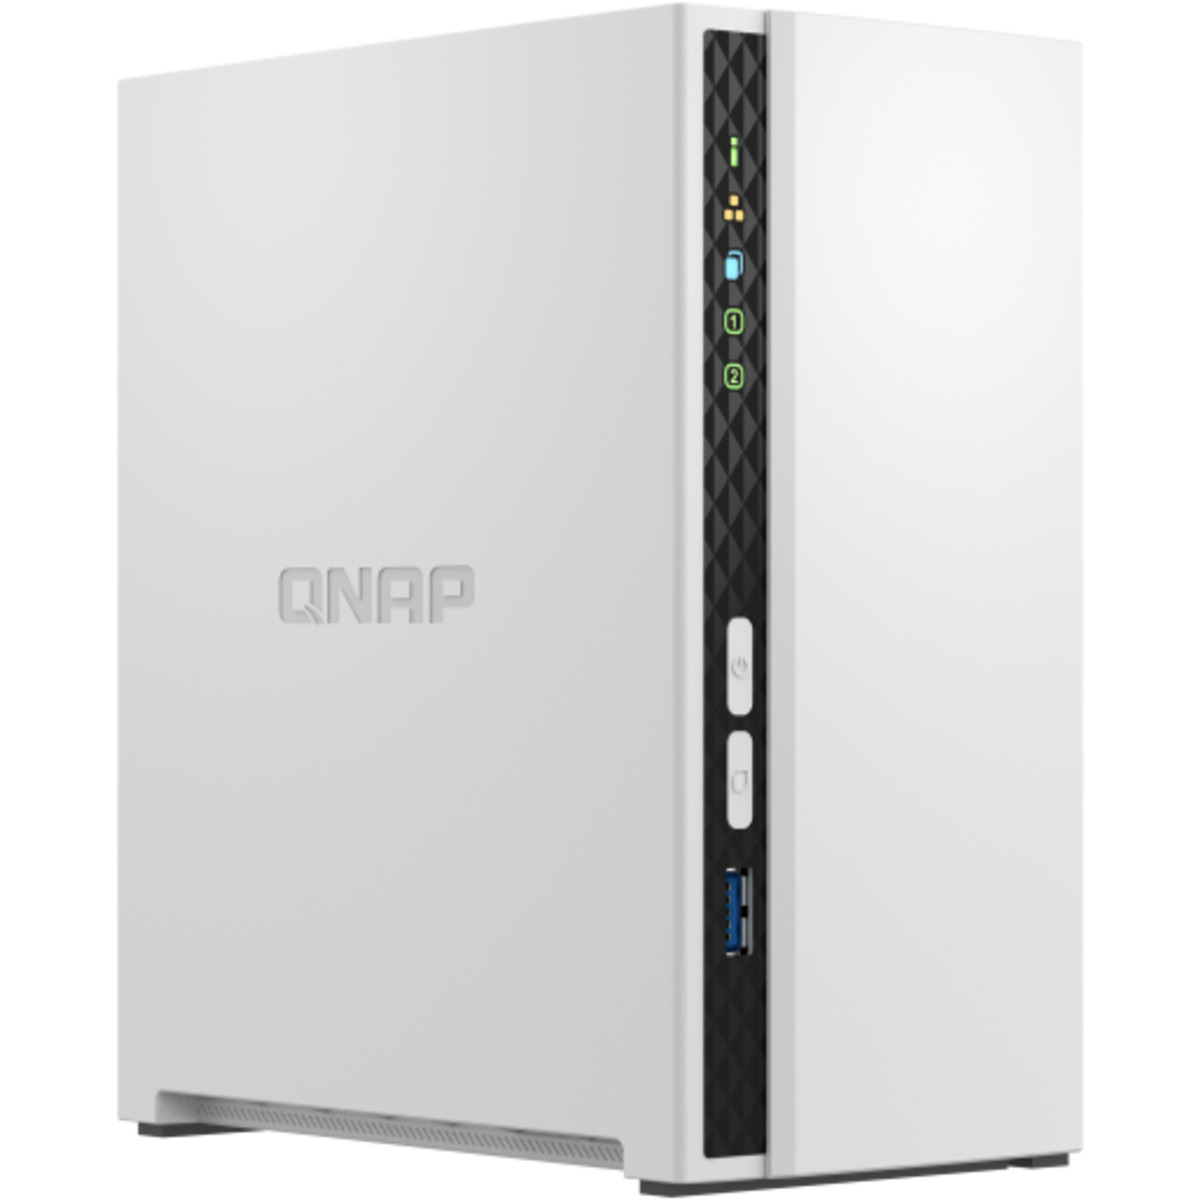 QNAP TS-233 8tb 2-Bay Desktop Personal / Basic Home / Small Office NAS - Network Attached Storage Device 2x4tb Toshiba MN Series MN08ADA400E 3.5 7200rpm SATA 6Gb/s HDD NAS Class Drives Installed - Burn-In Tested - ON SALE TS-233